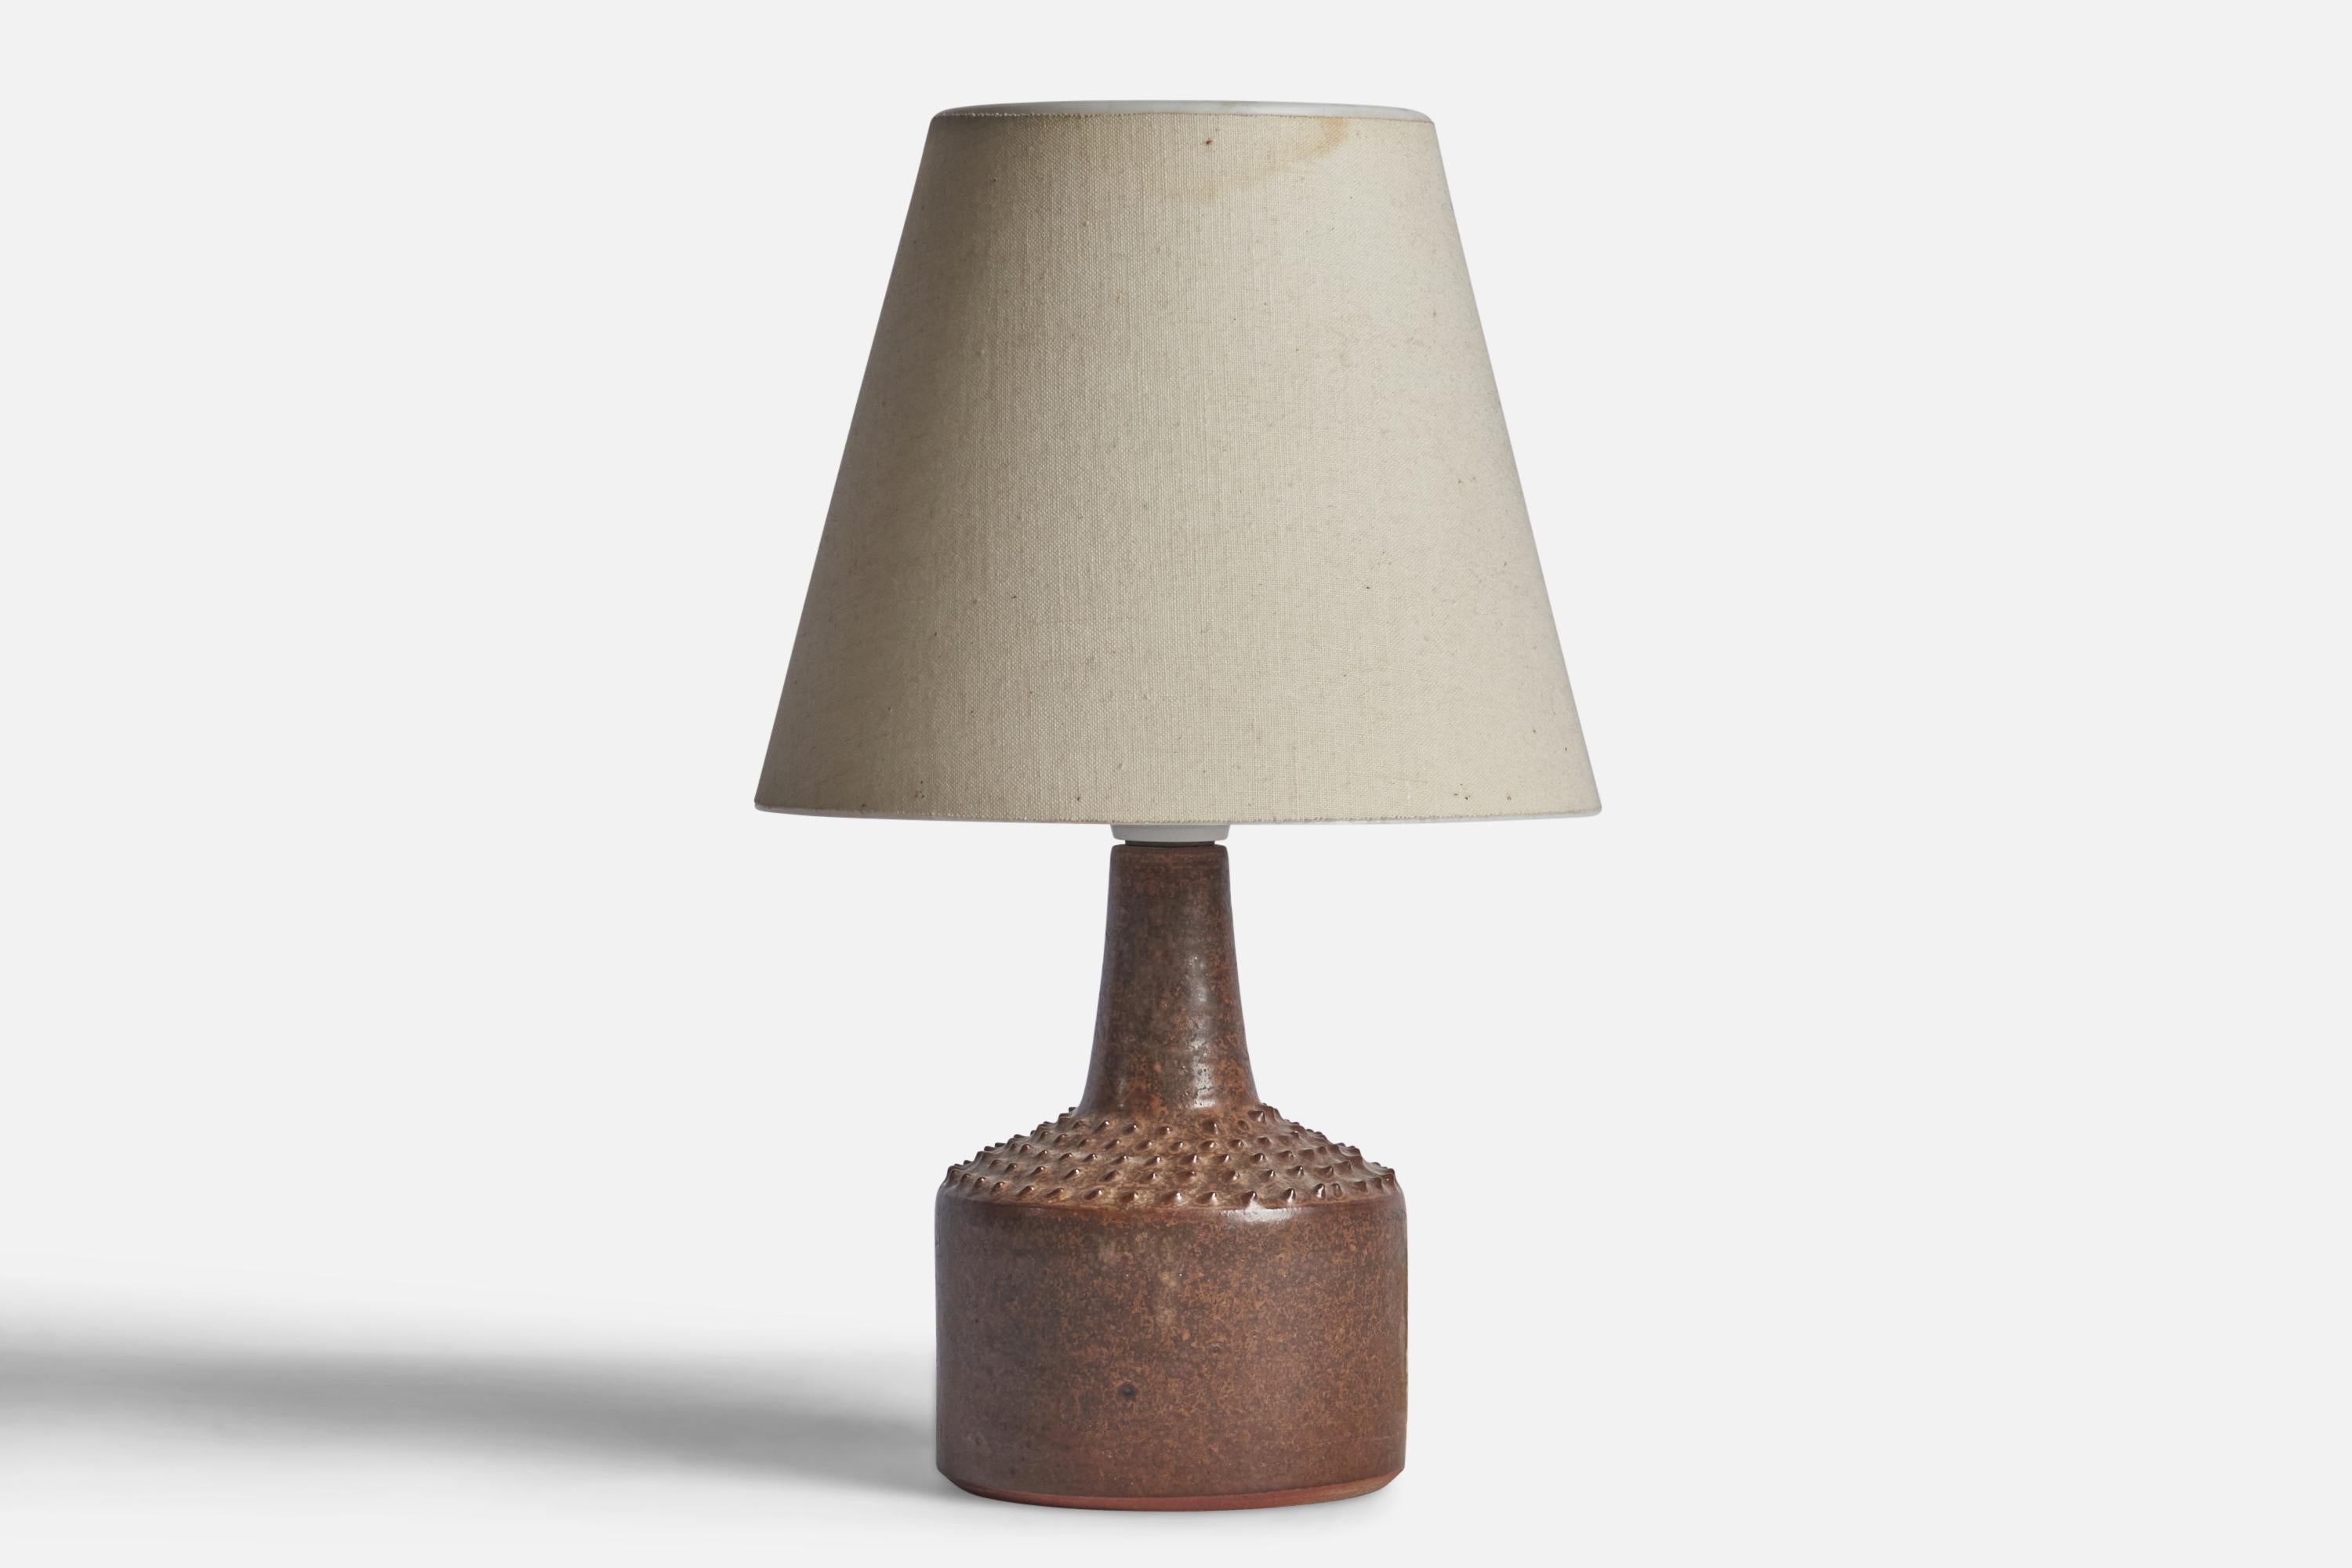 A small brown-glazed stoneware table lamp designed and produced by Rolf Palm, Mölle, Sweden, 1960s.

“Palm” stamp on bottom

Dimensions of Lamp (inches): 7.75” H x 3.5” Diameter
Dimensions of Shade (inches): 3.5” Top Diameter x 6.4” Bottom Diameter